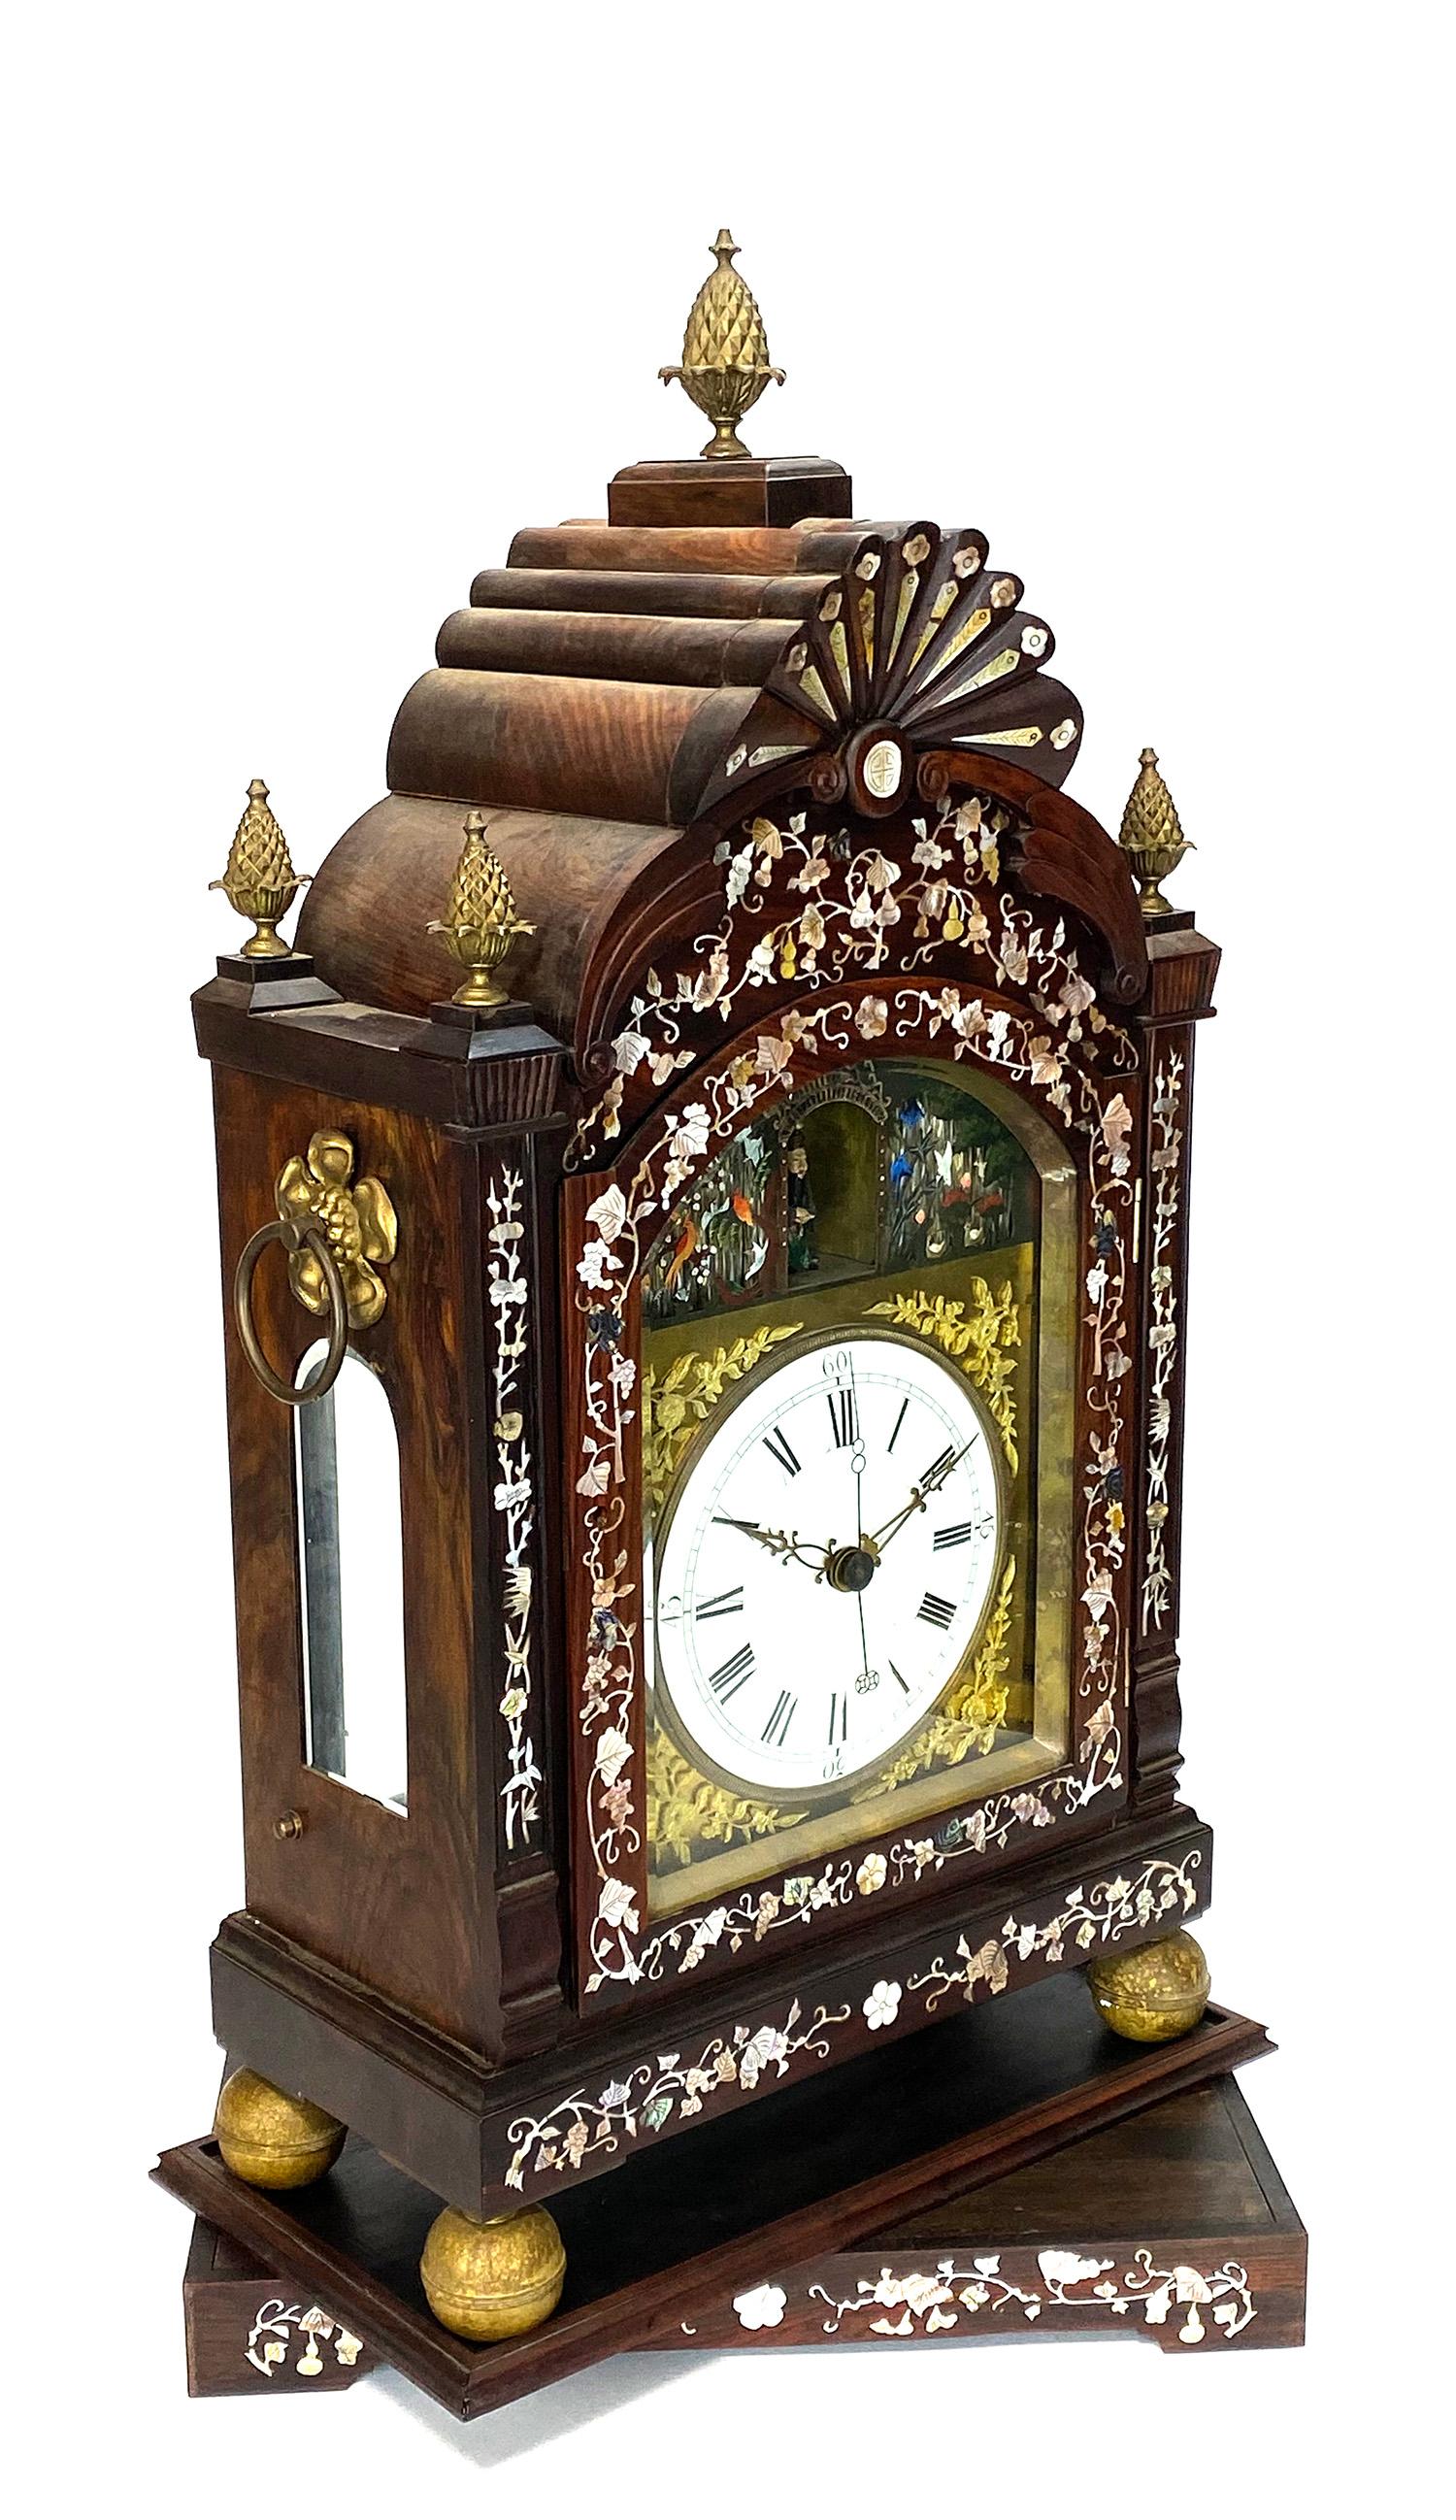 Here for your consideration is a large Chinese Canton bracket clock. The gorgeous ebony case is decorated with beautiful mother of pearl inlaid on the front. There are 5 brass pineapple form finials on the top to make the appearance of this clock